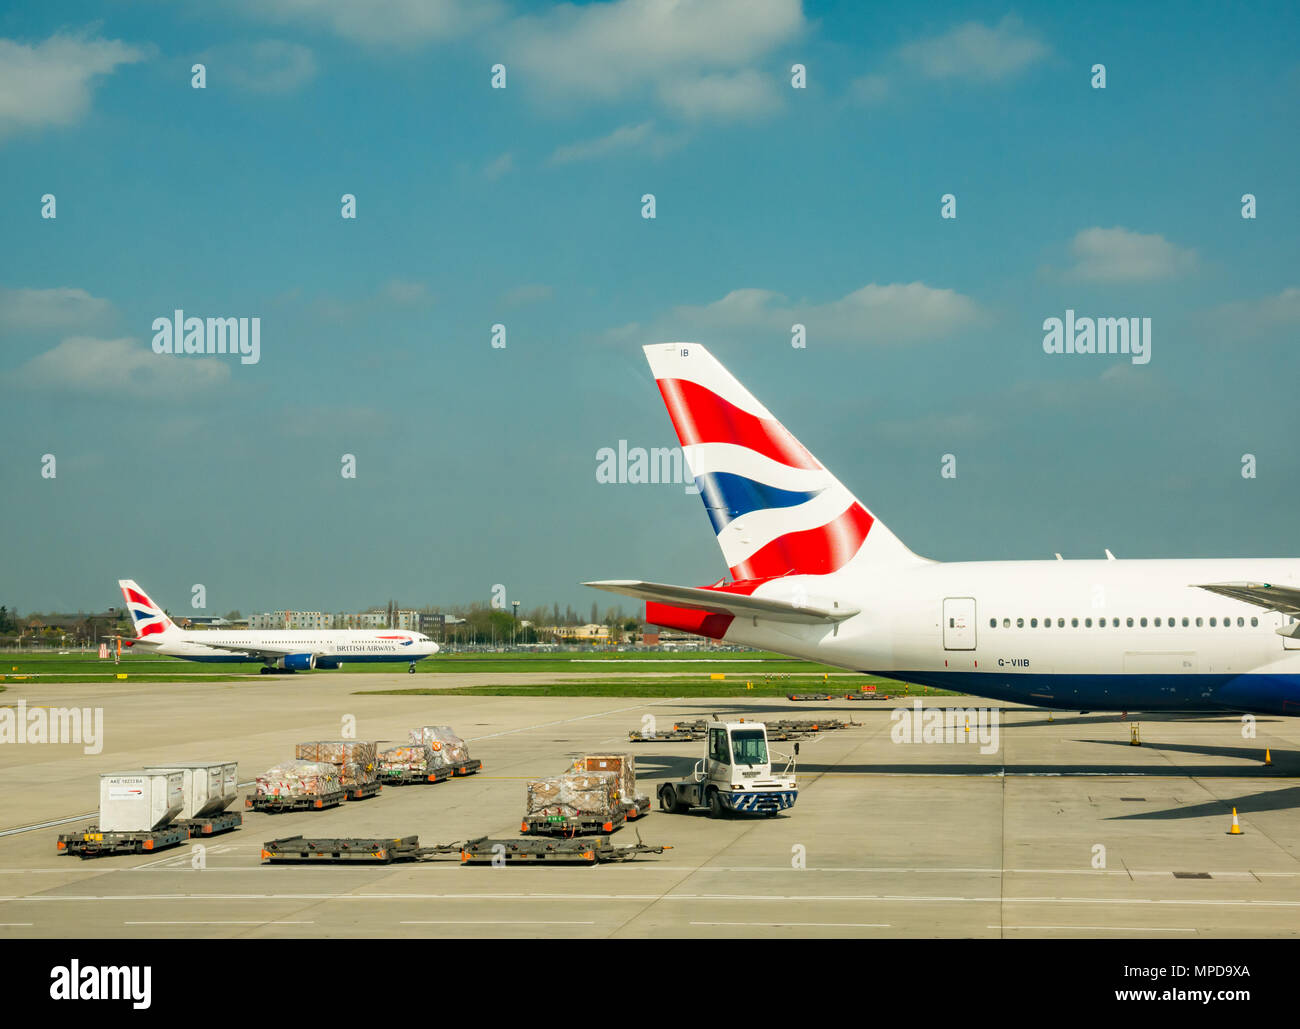 British Airways planes, including a Boeing 777 on airport apron with airport vehicles, Terminal 5, Heathrow airport, London, England, UK Stock Photo